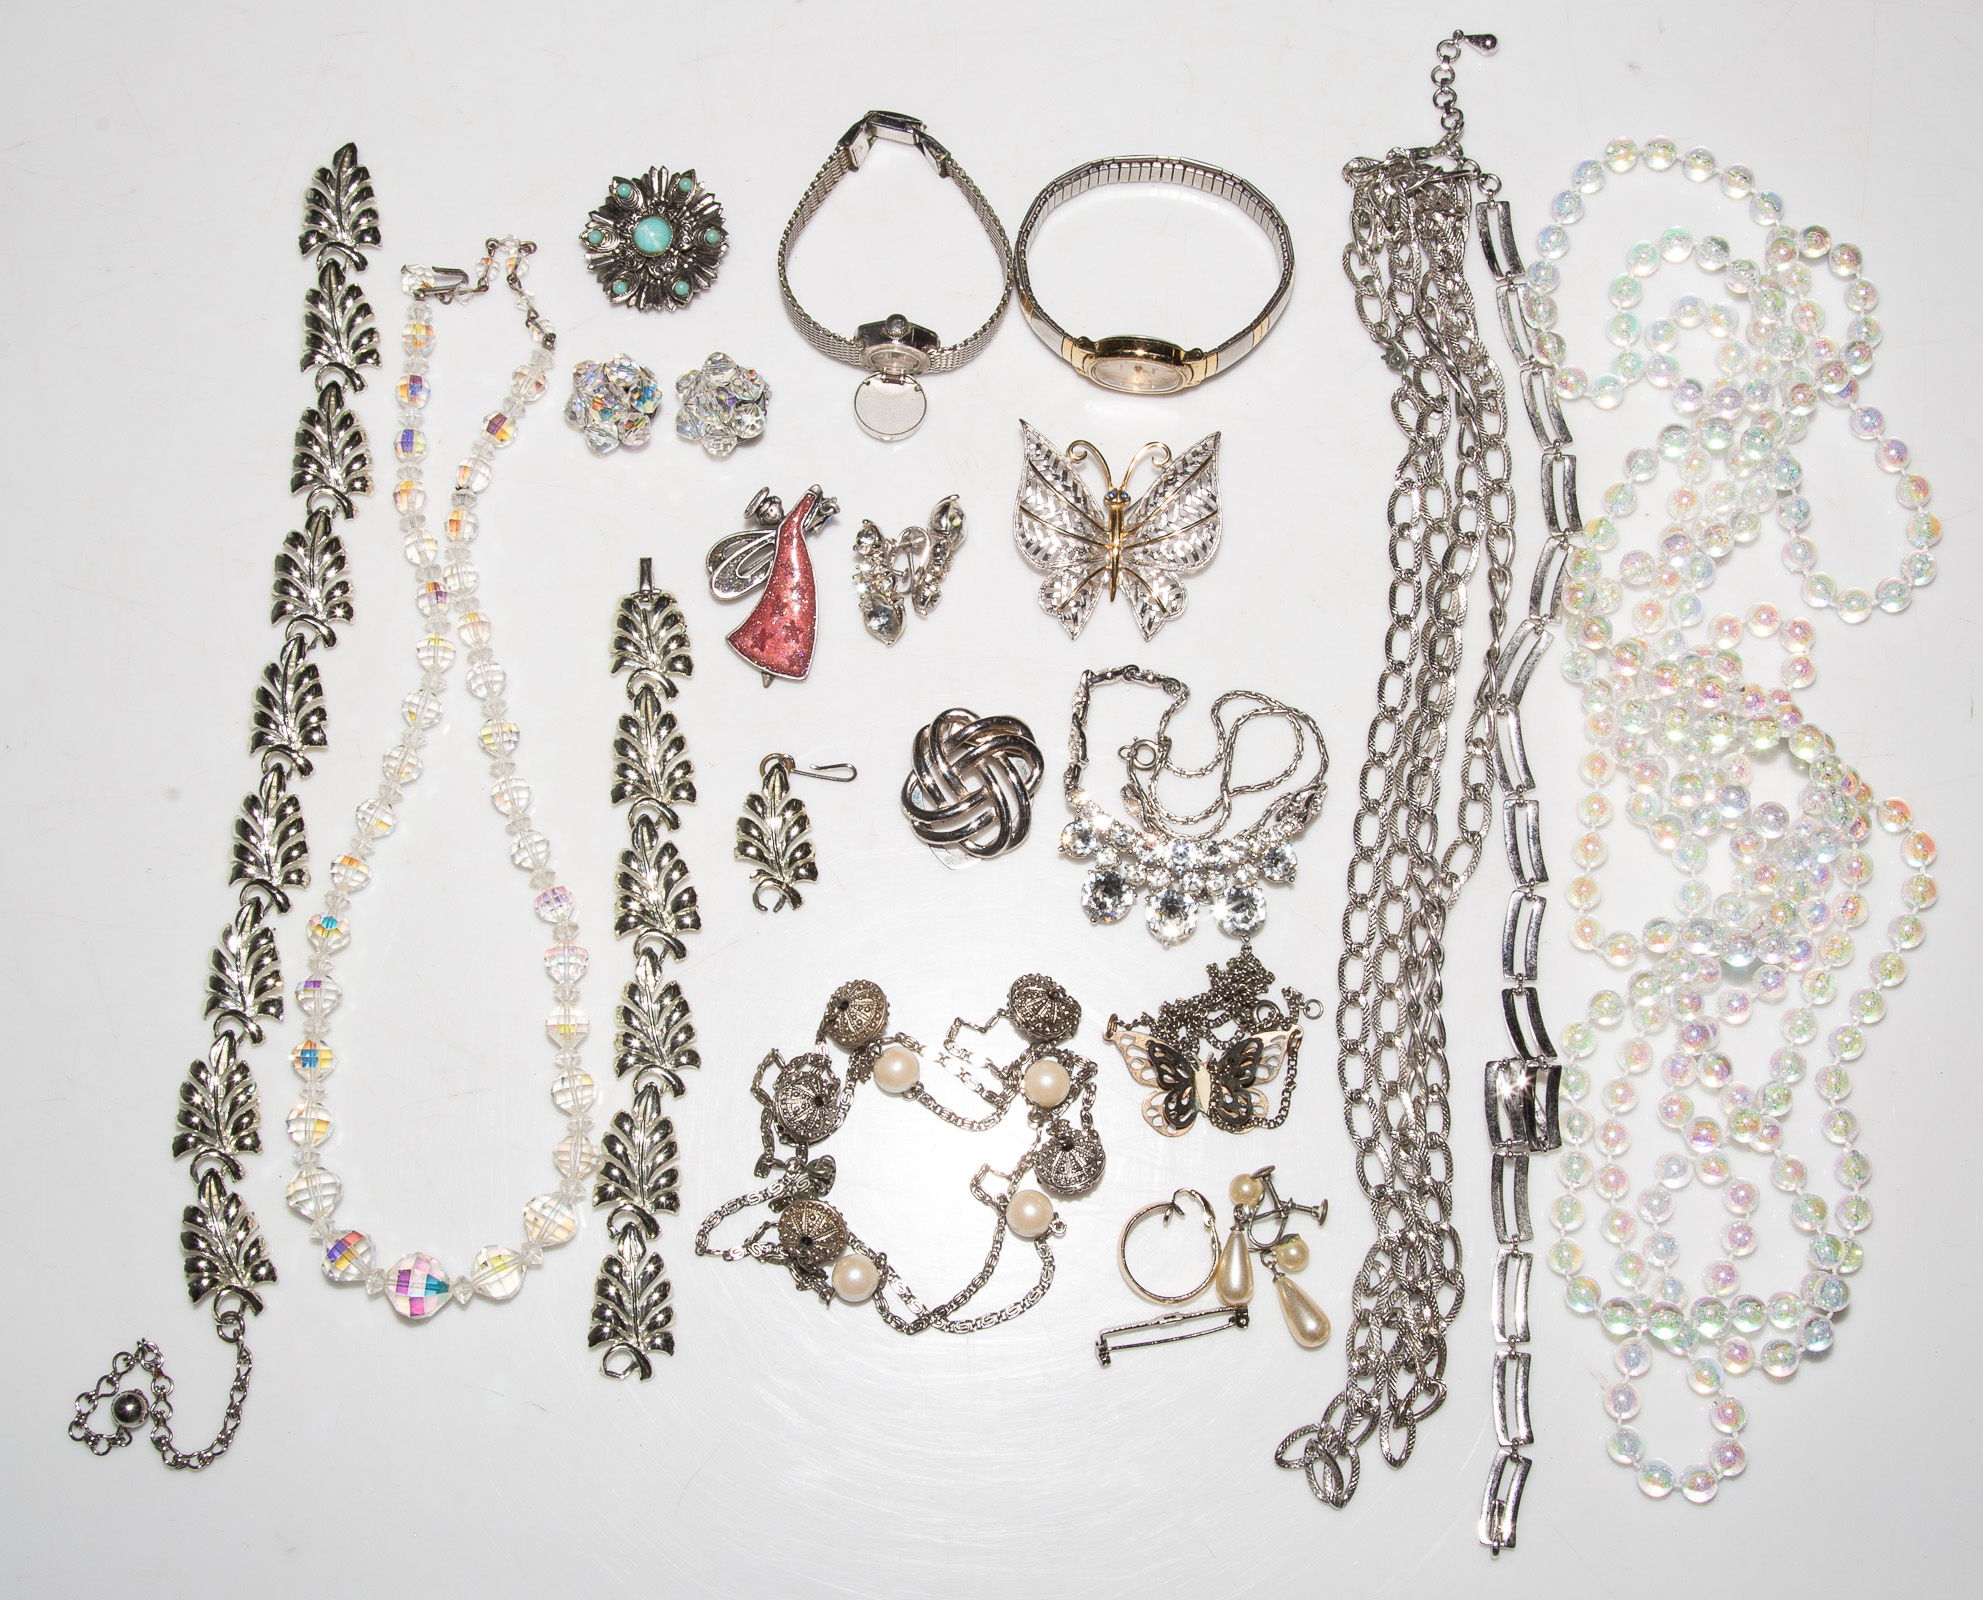 COLLECTION OF VINTAGE FASHION JEWELRY